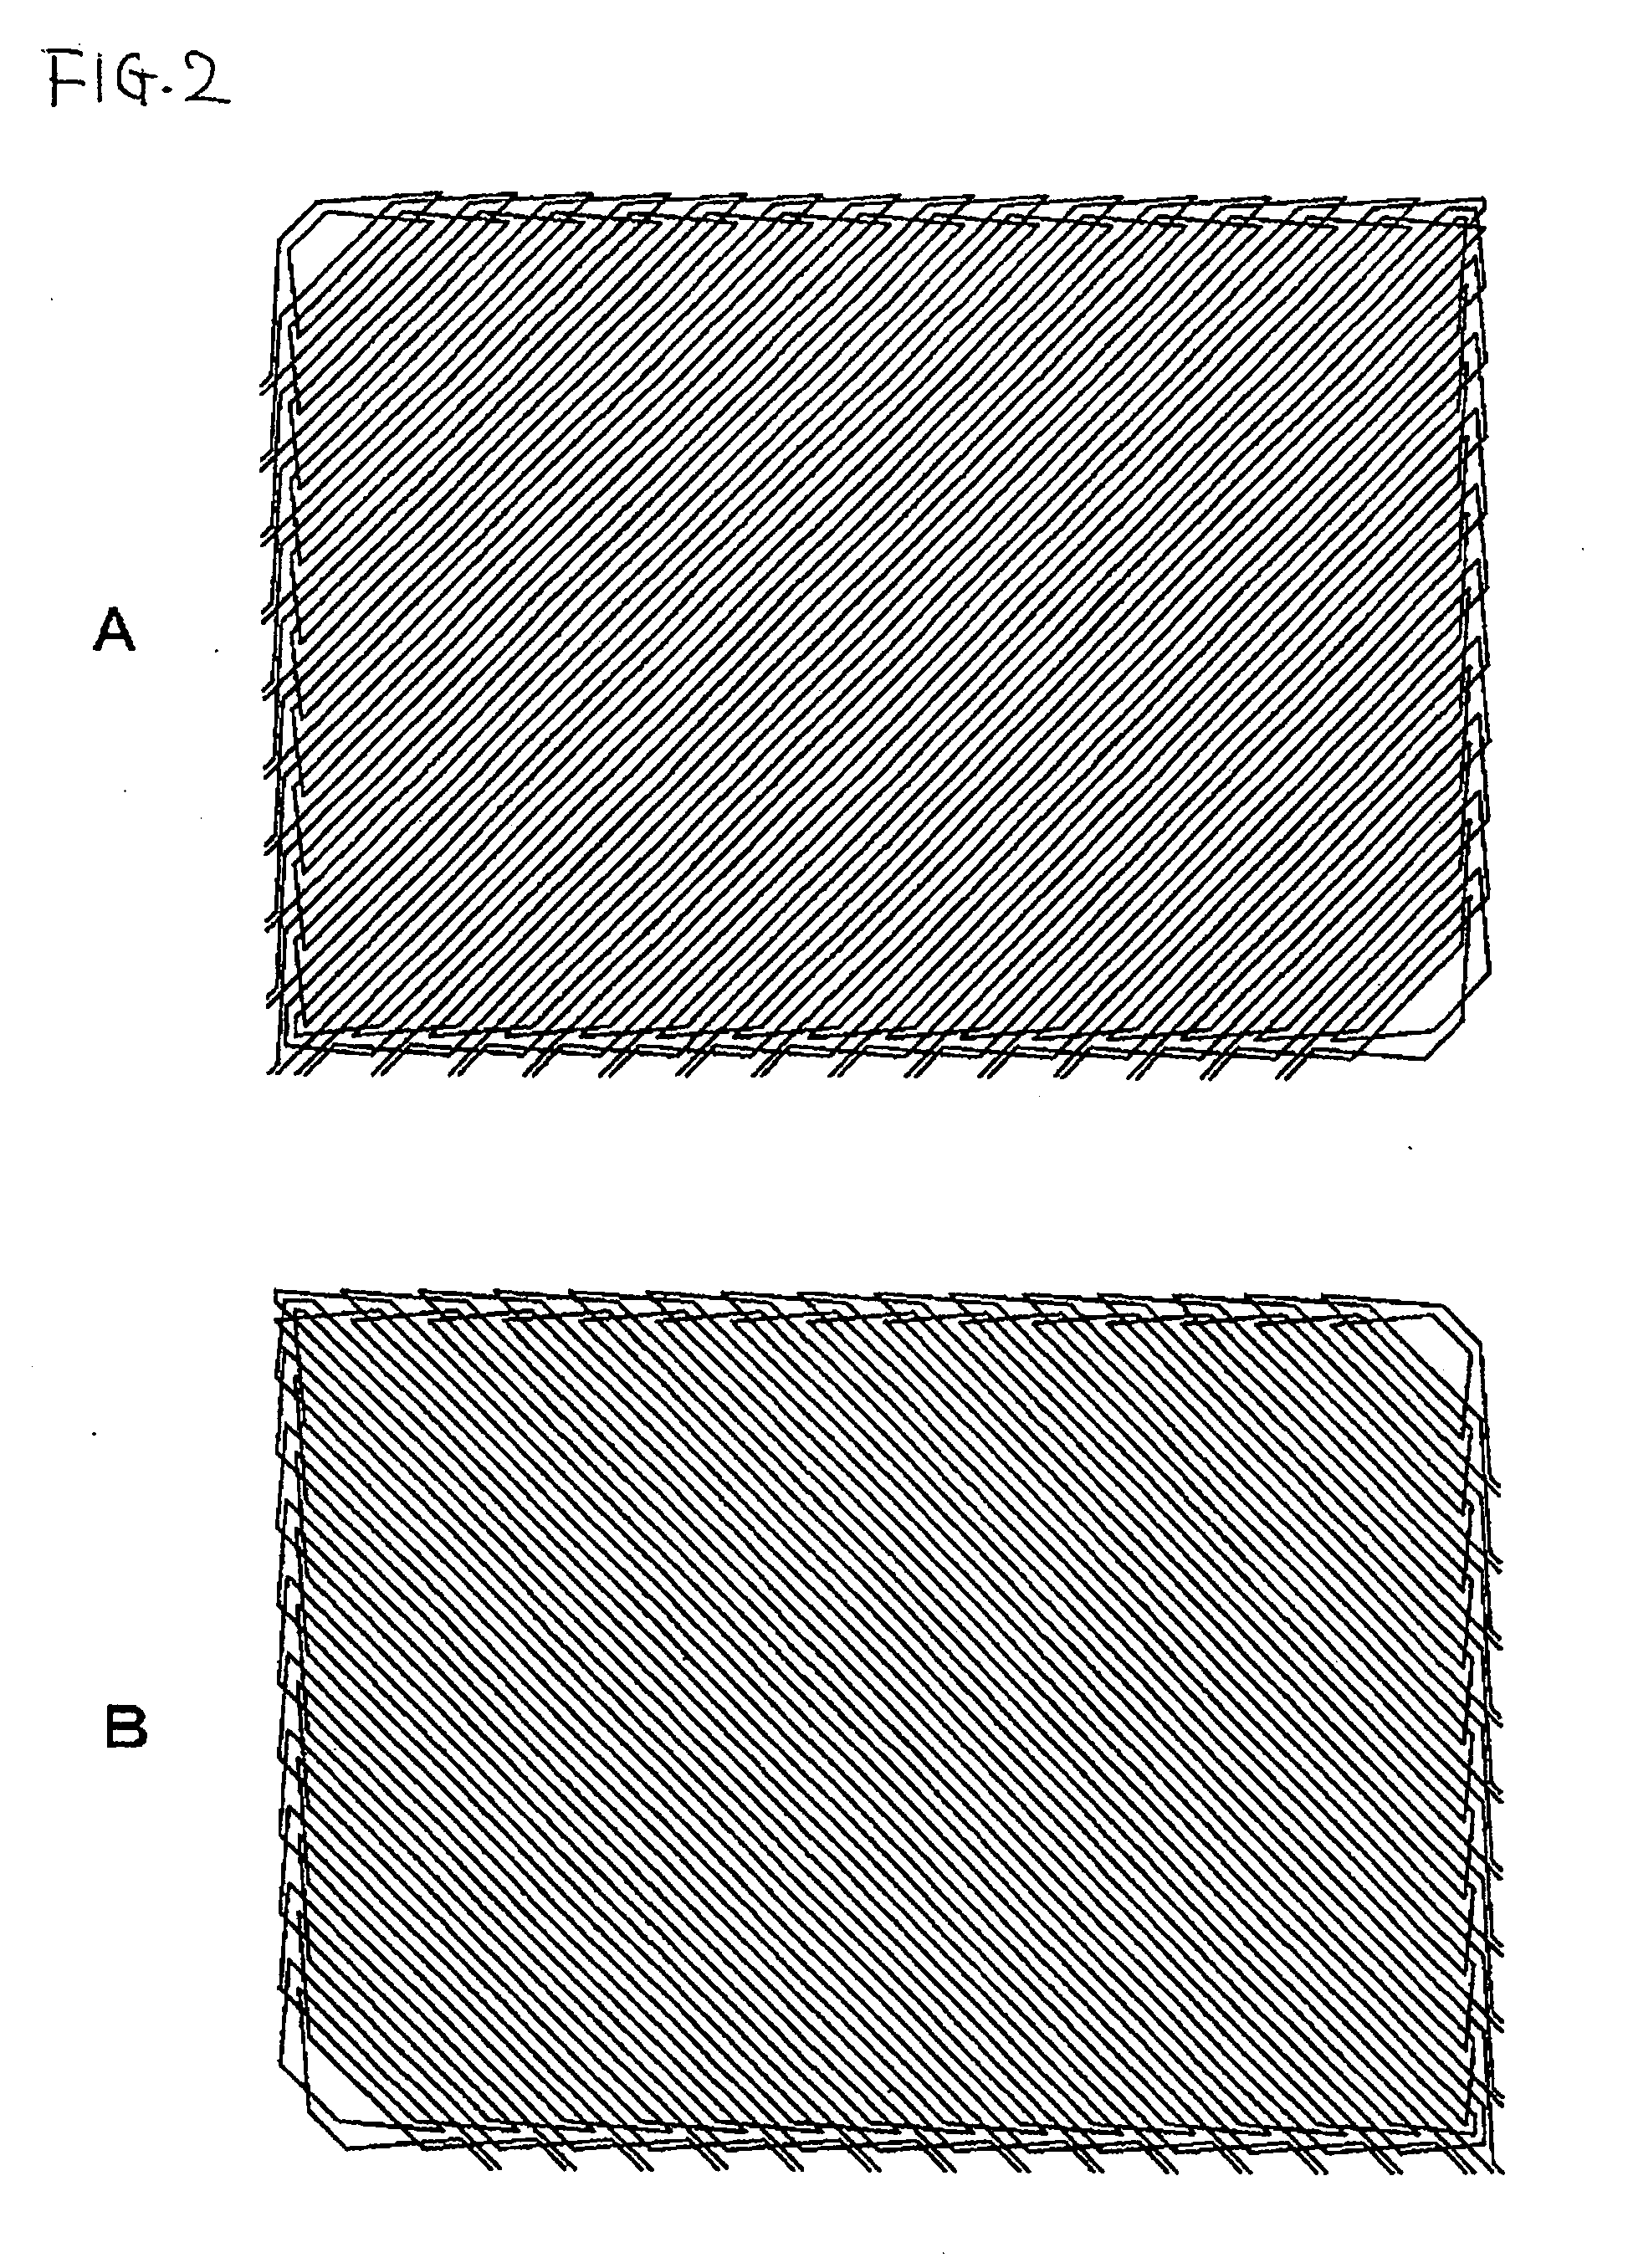 Position detecting apparatus, position inputting apparatus, and computer including the same